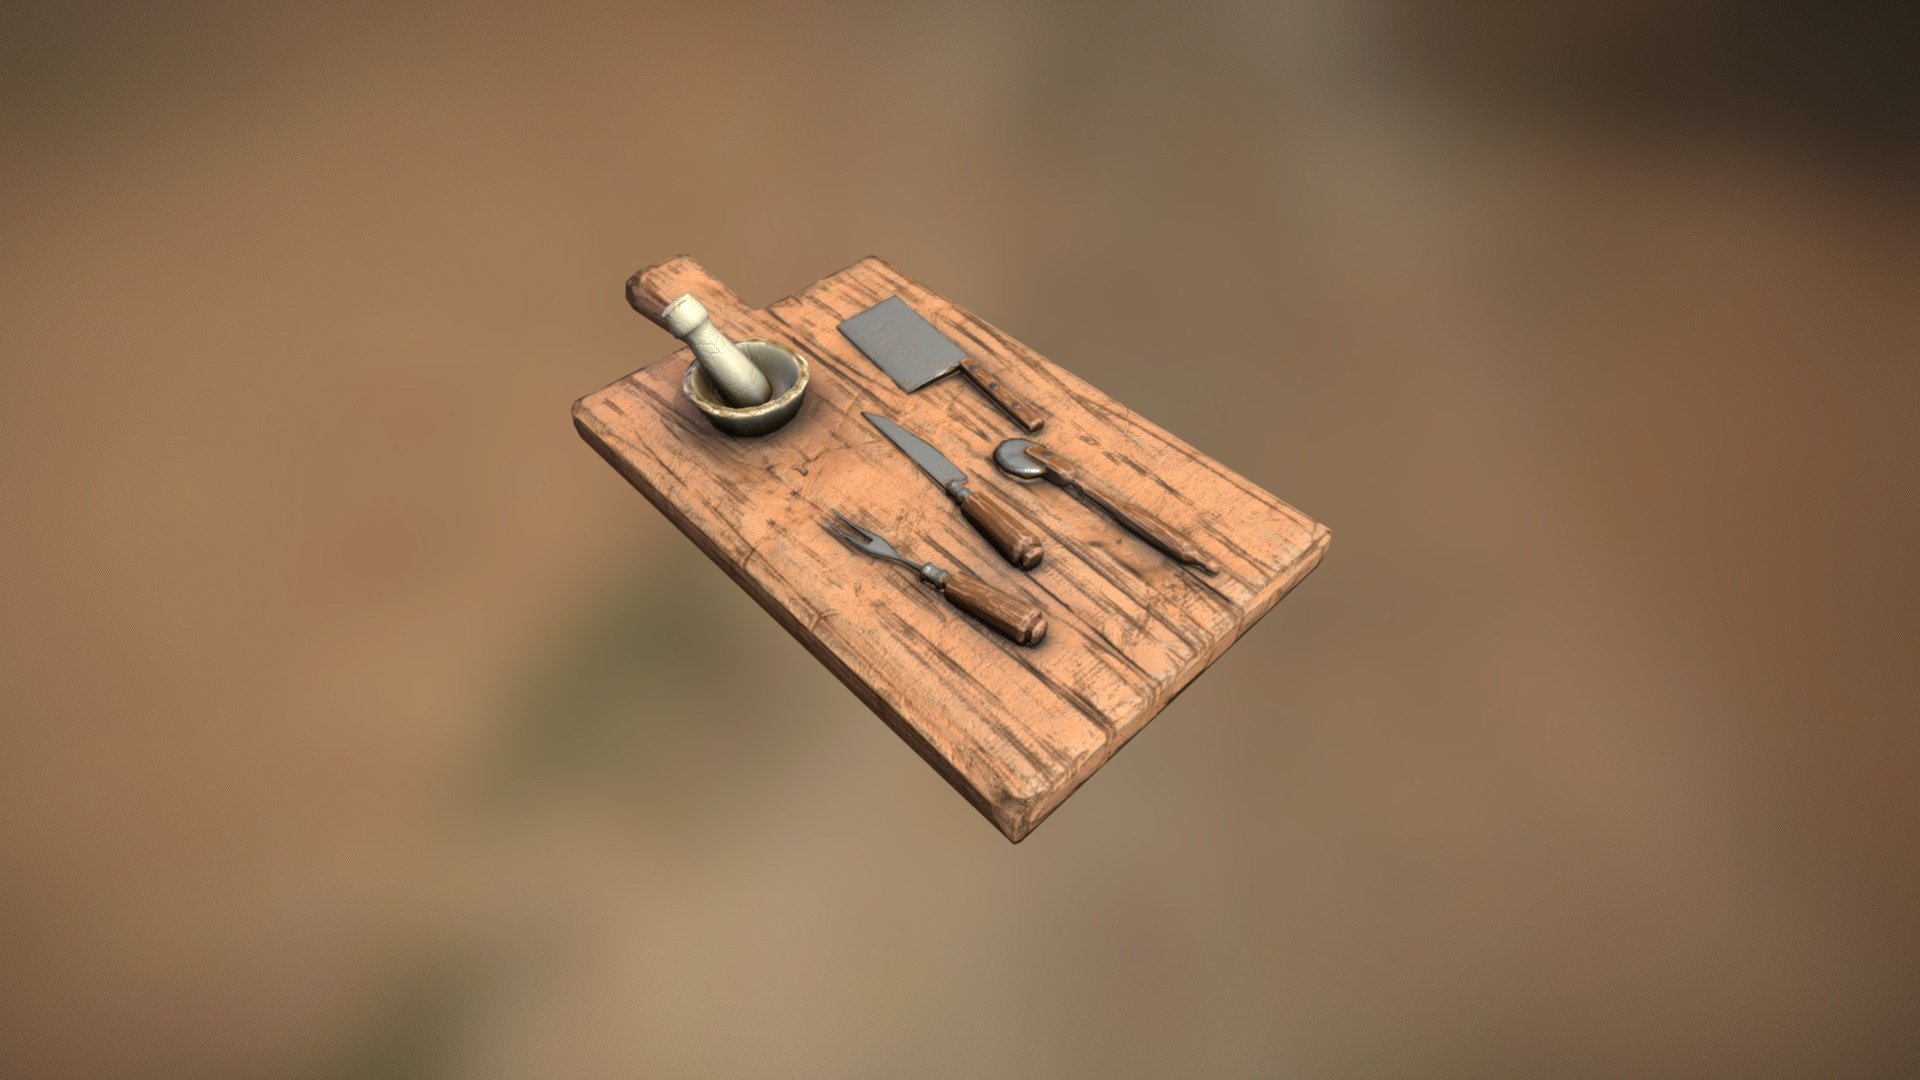 A quick chopping board model I made in around 5 hours for a class 3d model